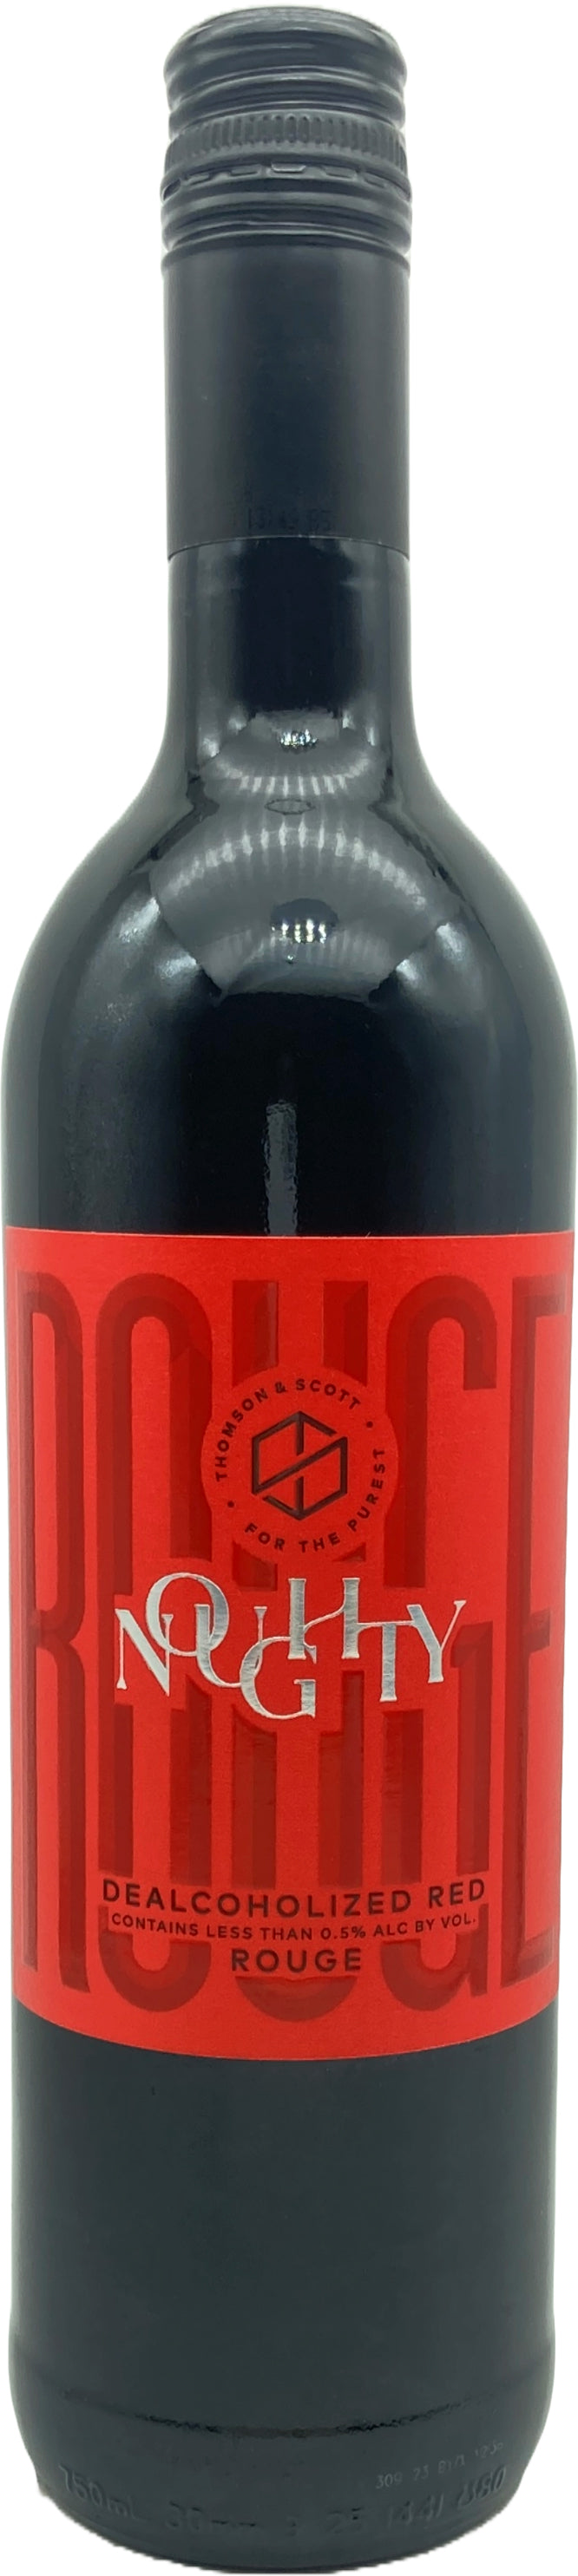 Noughty De-Alcoholized Red (ALCOHOL FREE)